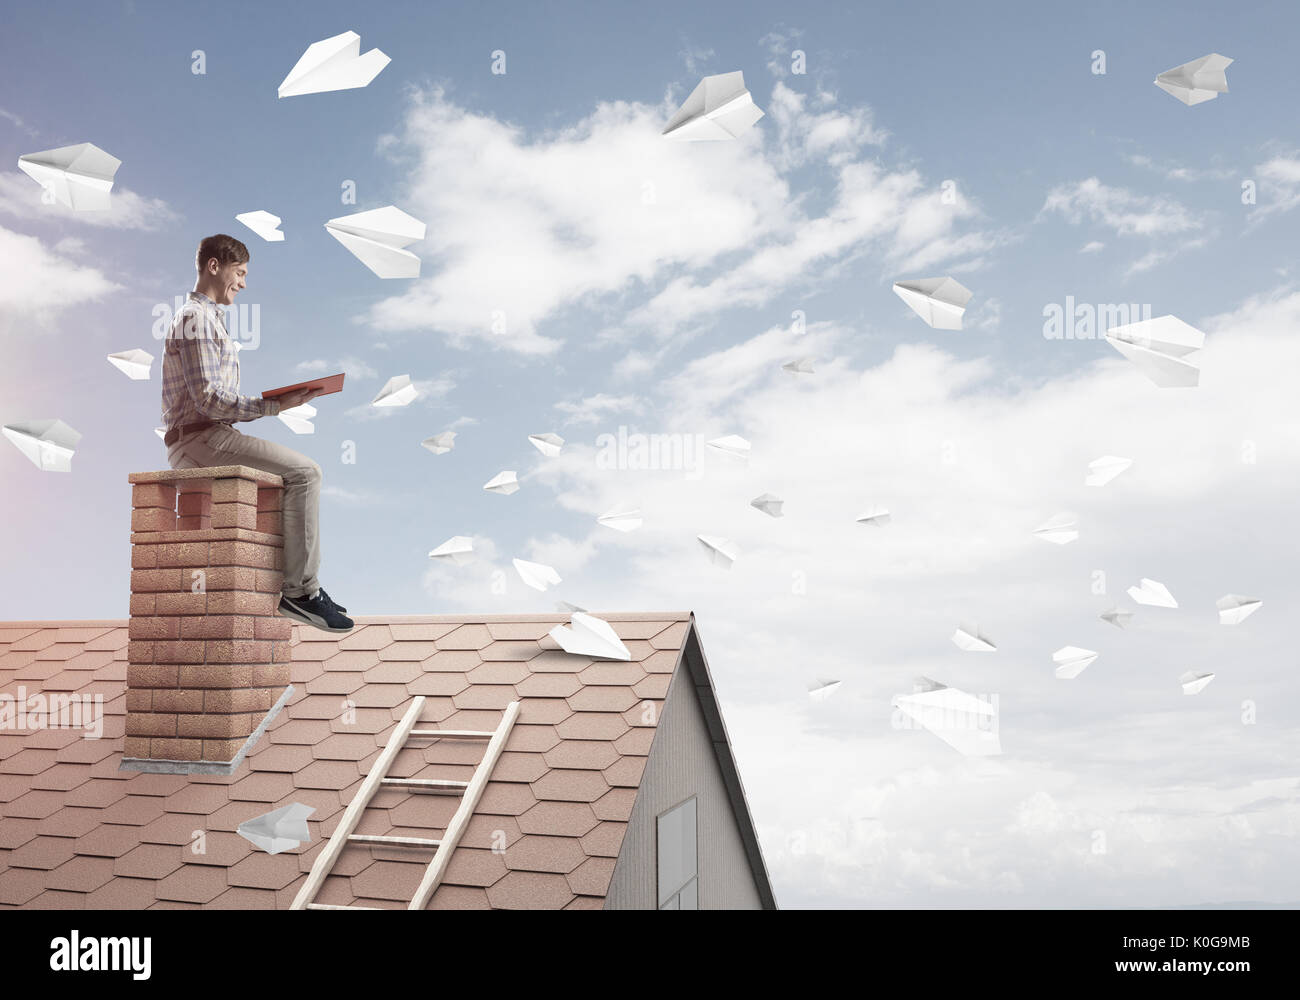 Man on brick roof reading book and paper planes flying in air Stock Photo